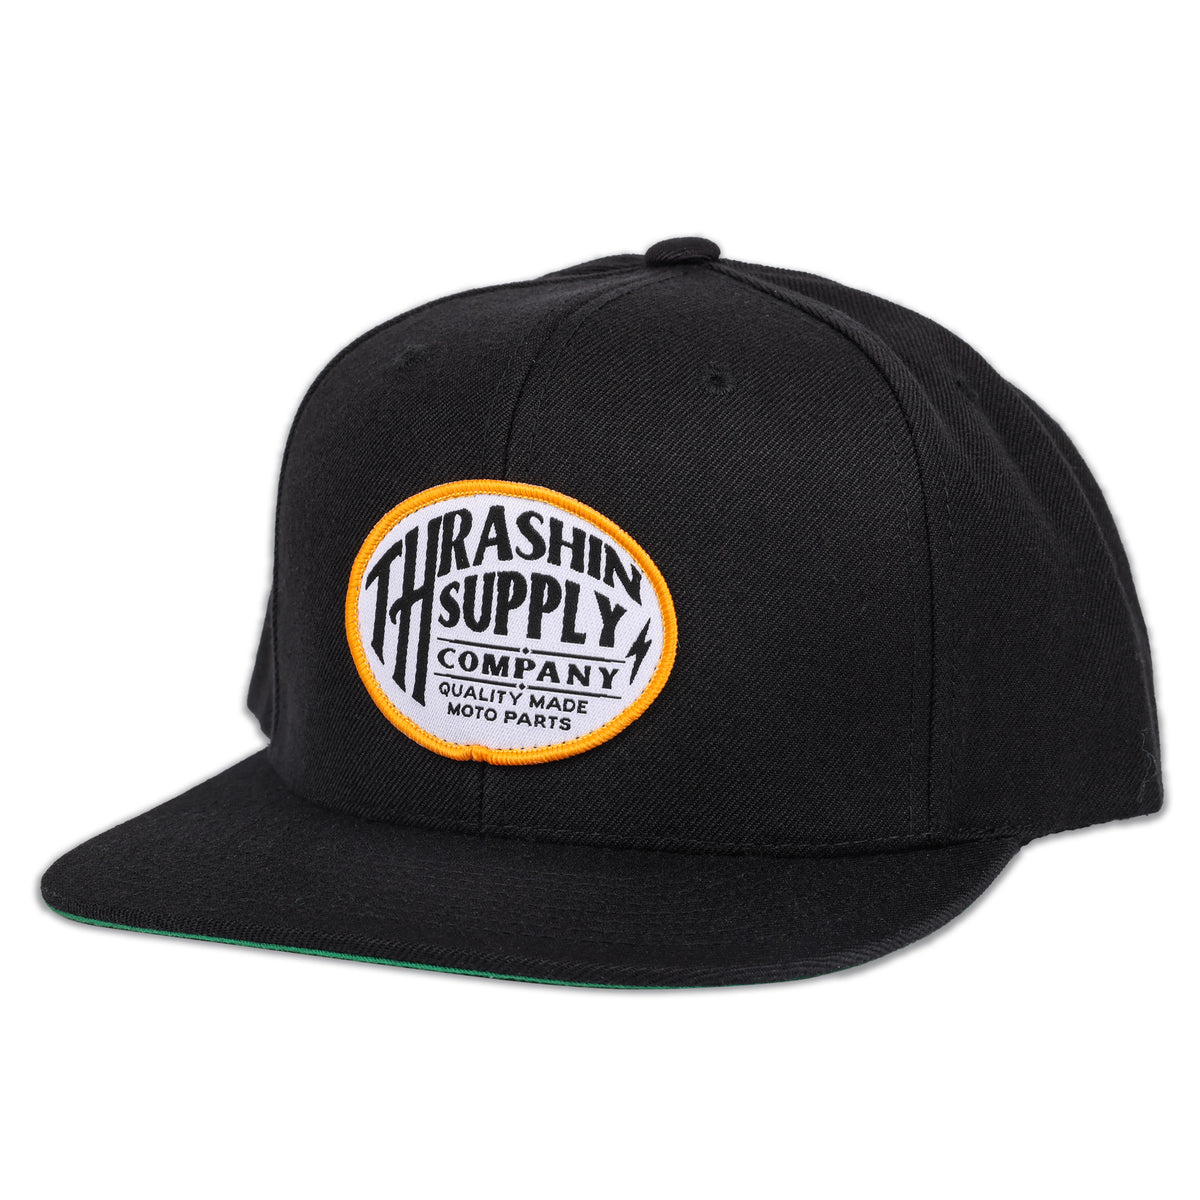 Quality Made Snapback - Black | Structured Flat Bill